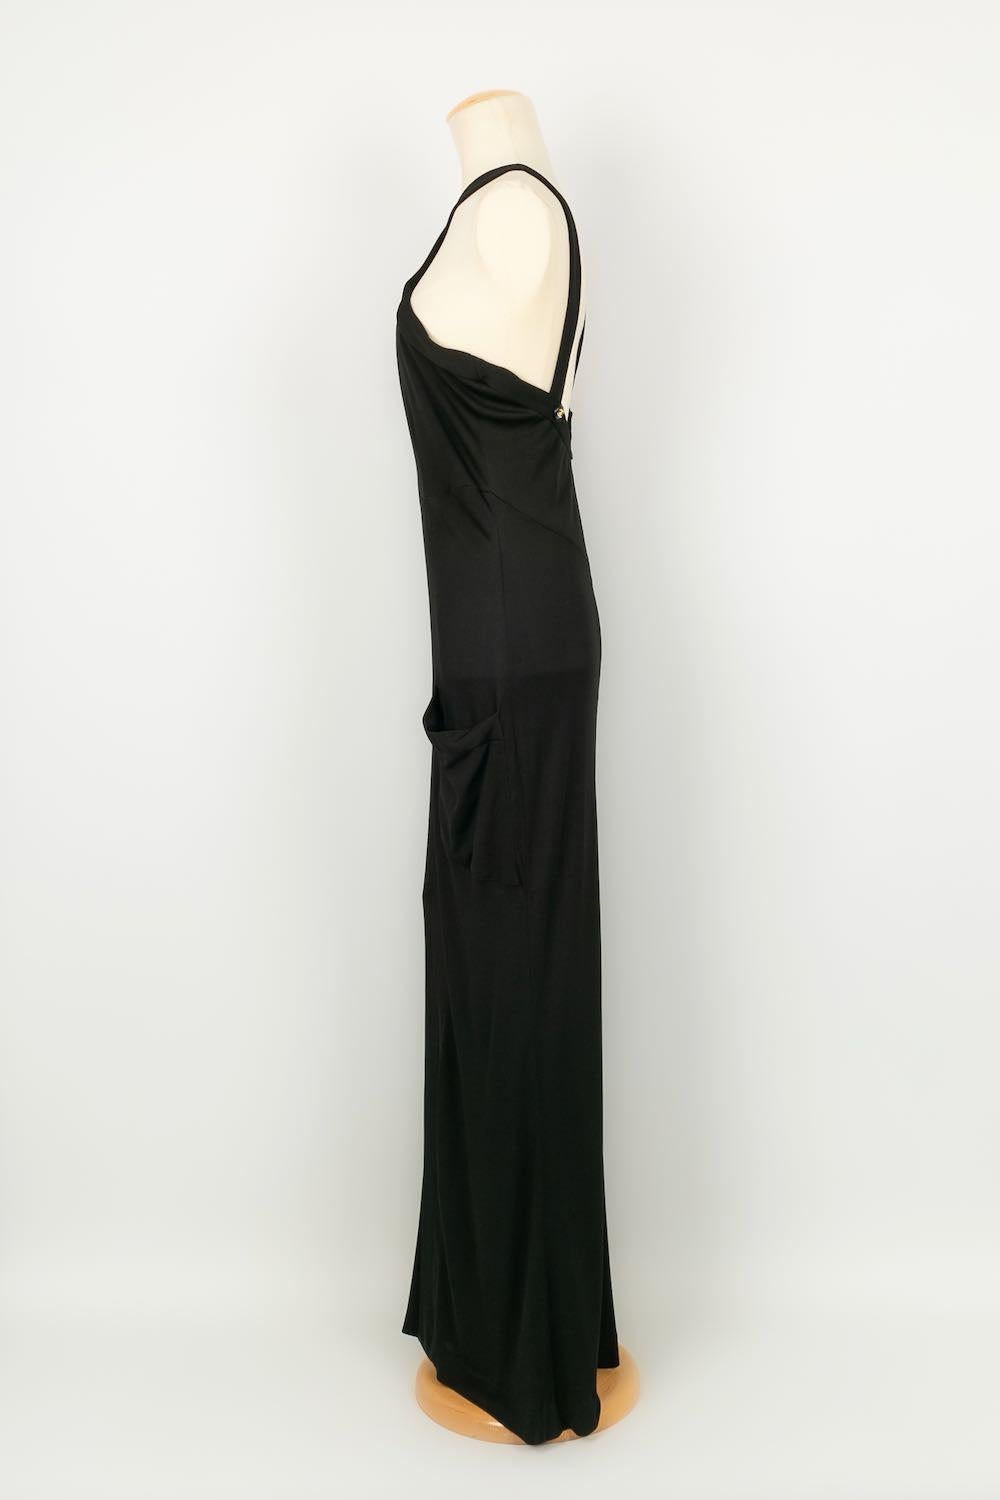 Chanel - (Made in France) Long dress, black. Gold metal and resin buttons. Size indicated 42FR. Summer 1997 collection.

Additional information:
Dimensions: Length: 155 cm
Condition: Good condition
Seller Ref number: VR217